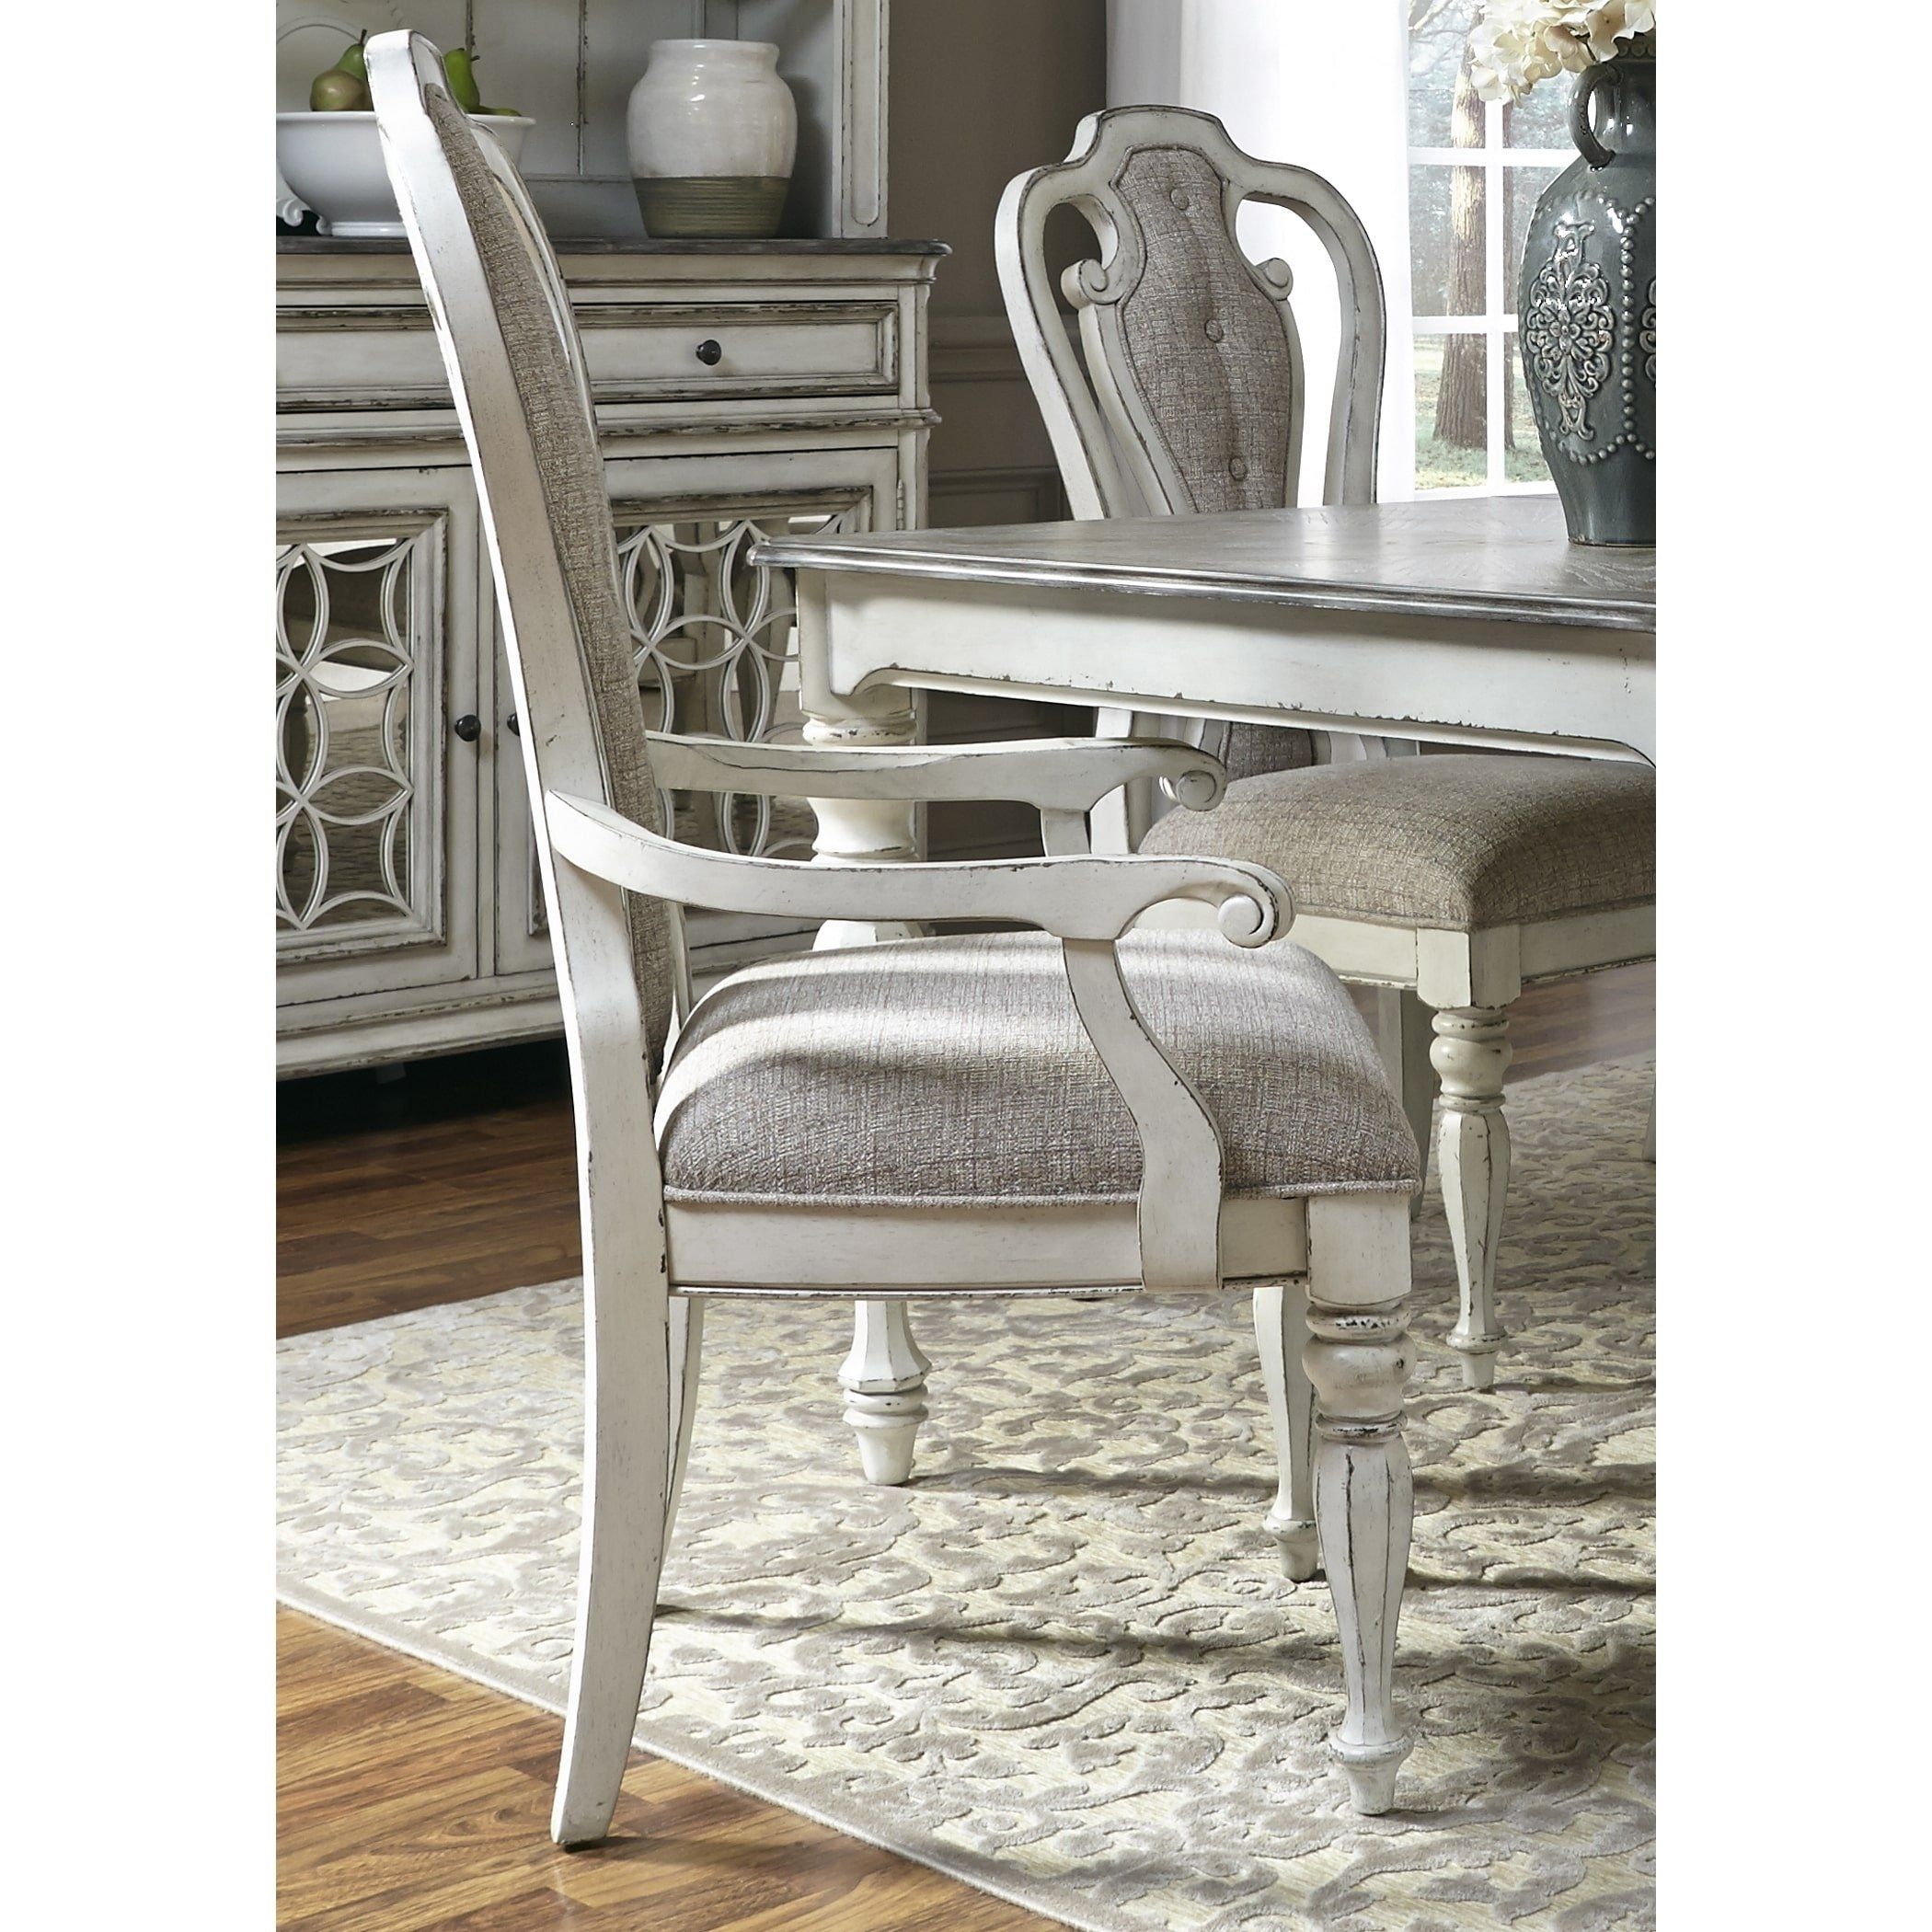 Magnolia Home Reed Arm Chairs With Regard To Most Current Shop Magnolia Manor Antique White Upholstered Arm Chair – Free (Photo 14 of 20)